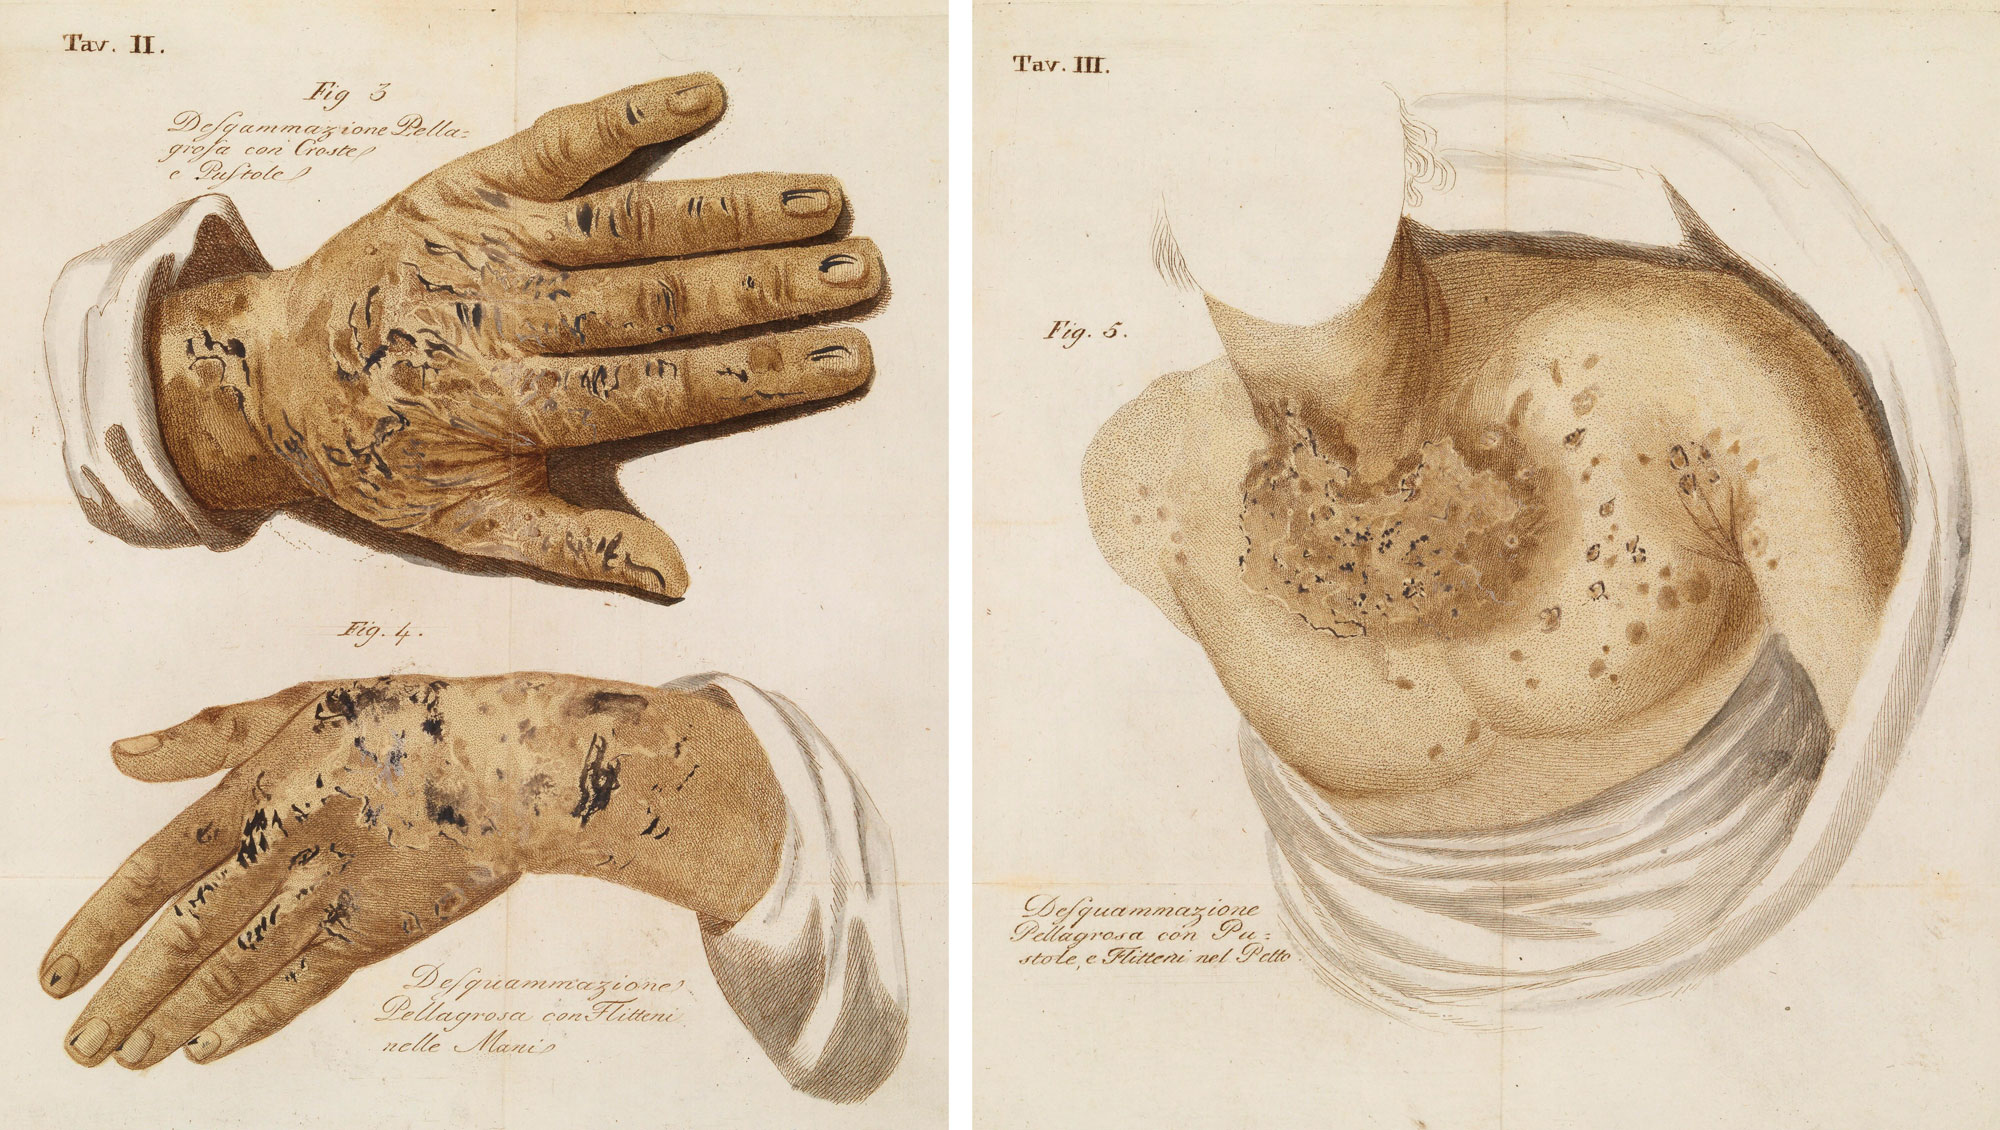 Two-panel image showing plates illustrating pellagra symptoms from a book published in 1814. Panel 1: Illustrations of two hands showing skin with rashes or plaques. Panel 2: Image of a person's neck and chest showing spotting, particularly on the lower neck and upper chest, indicating pellagra.